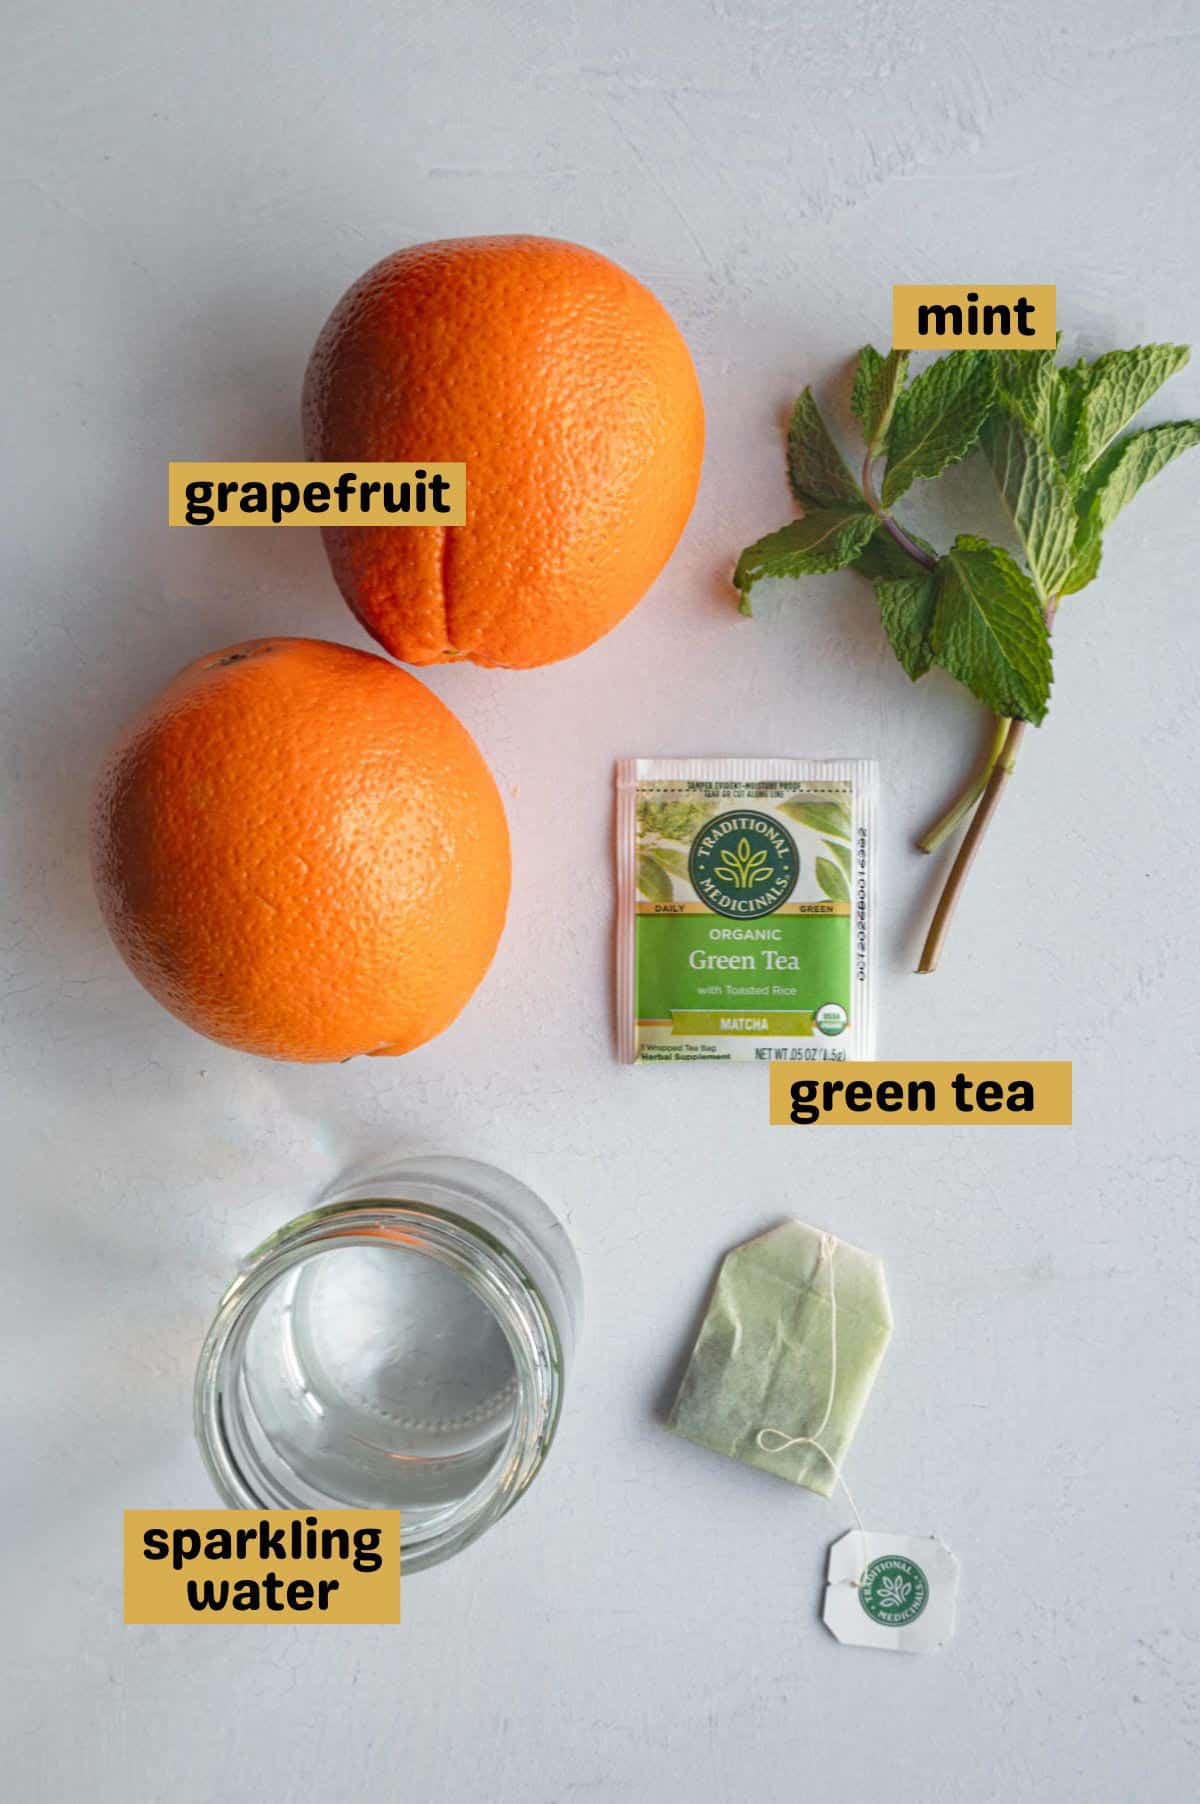 Two grapefruit, fresh mint, two green tea bags, and a jar of sparkling water.